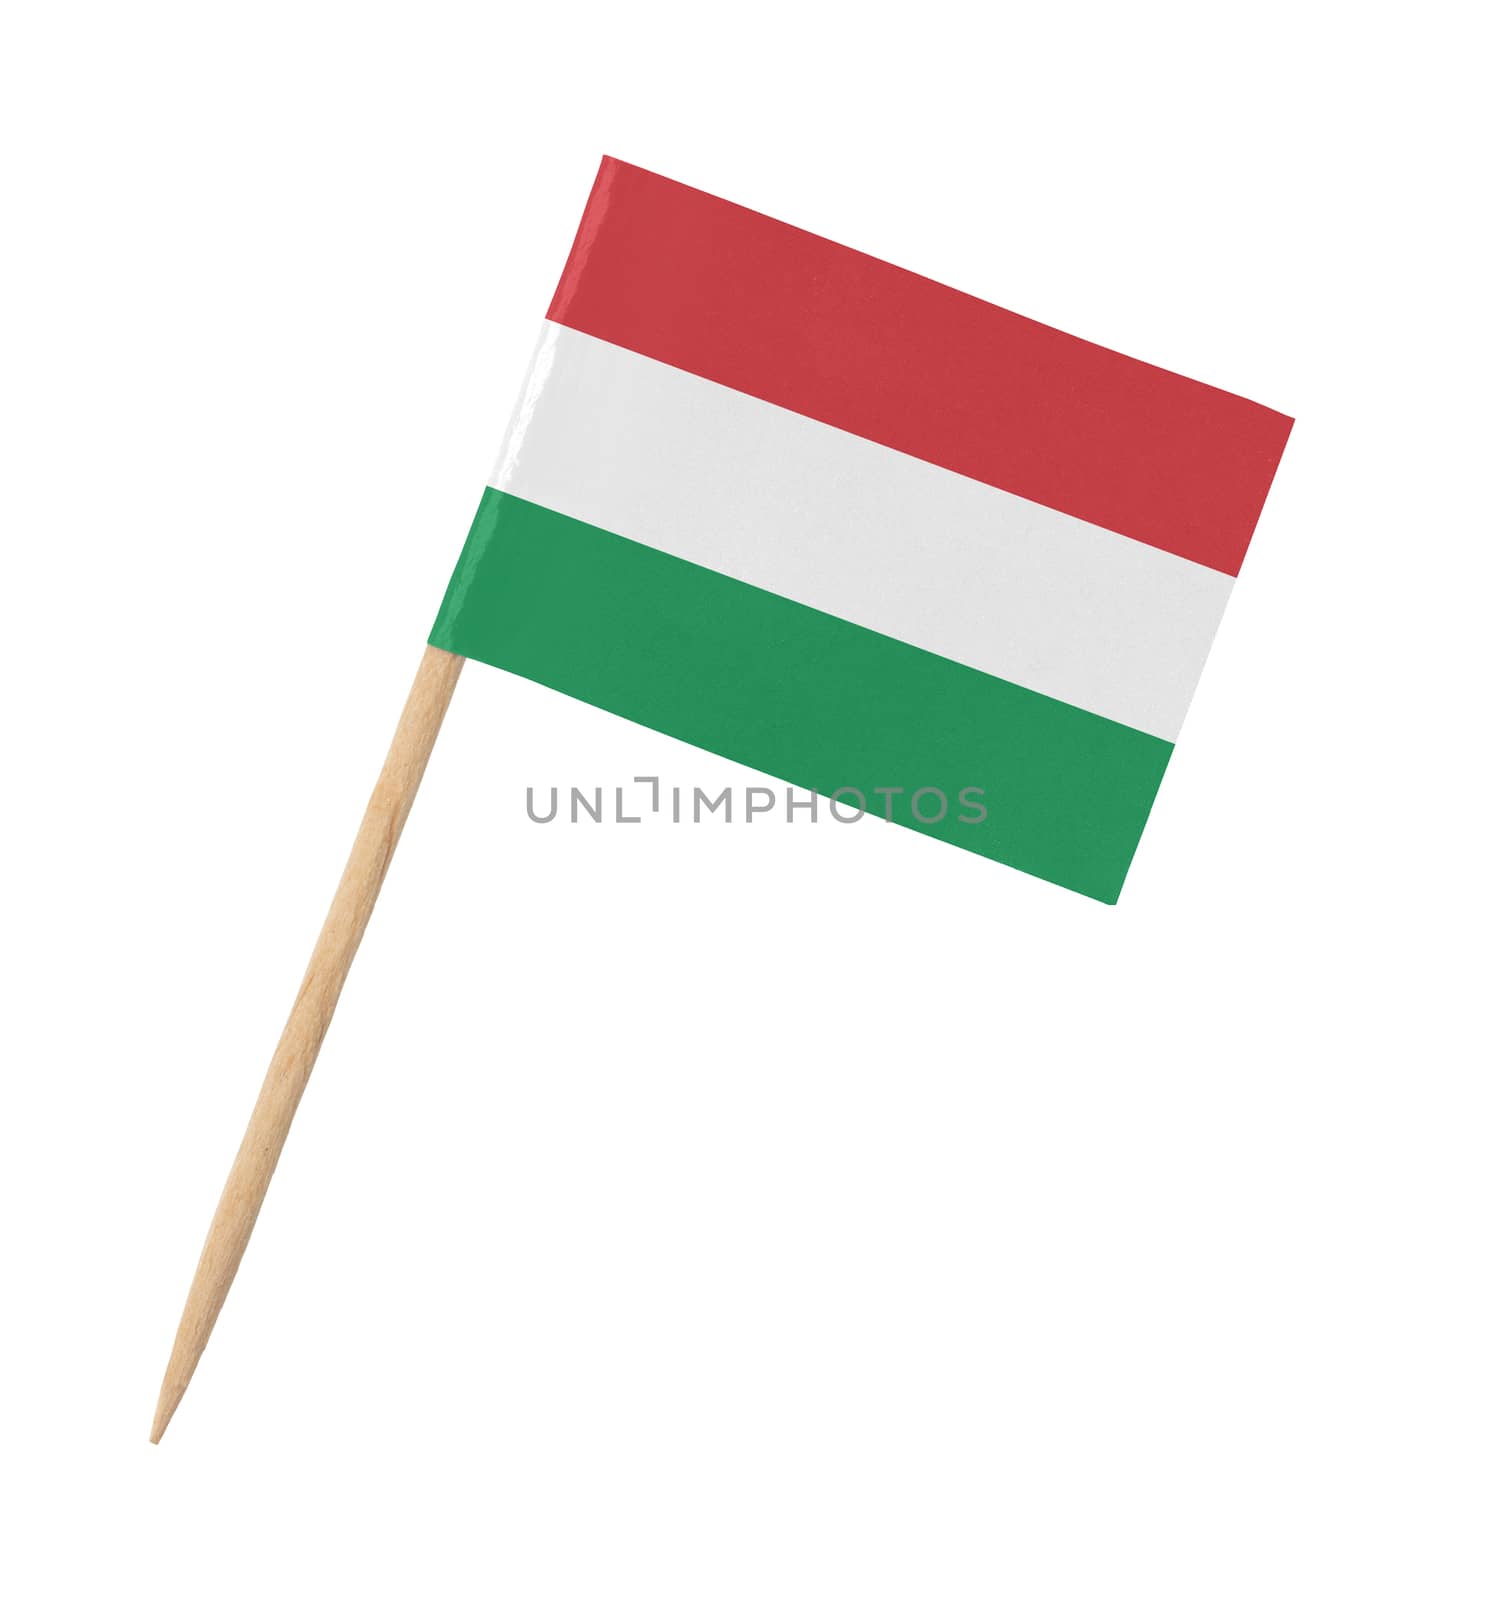 Small paper flag of Hungary on wooden stick by michaklootwijk